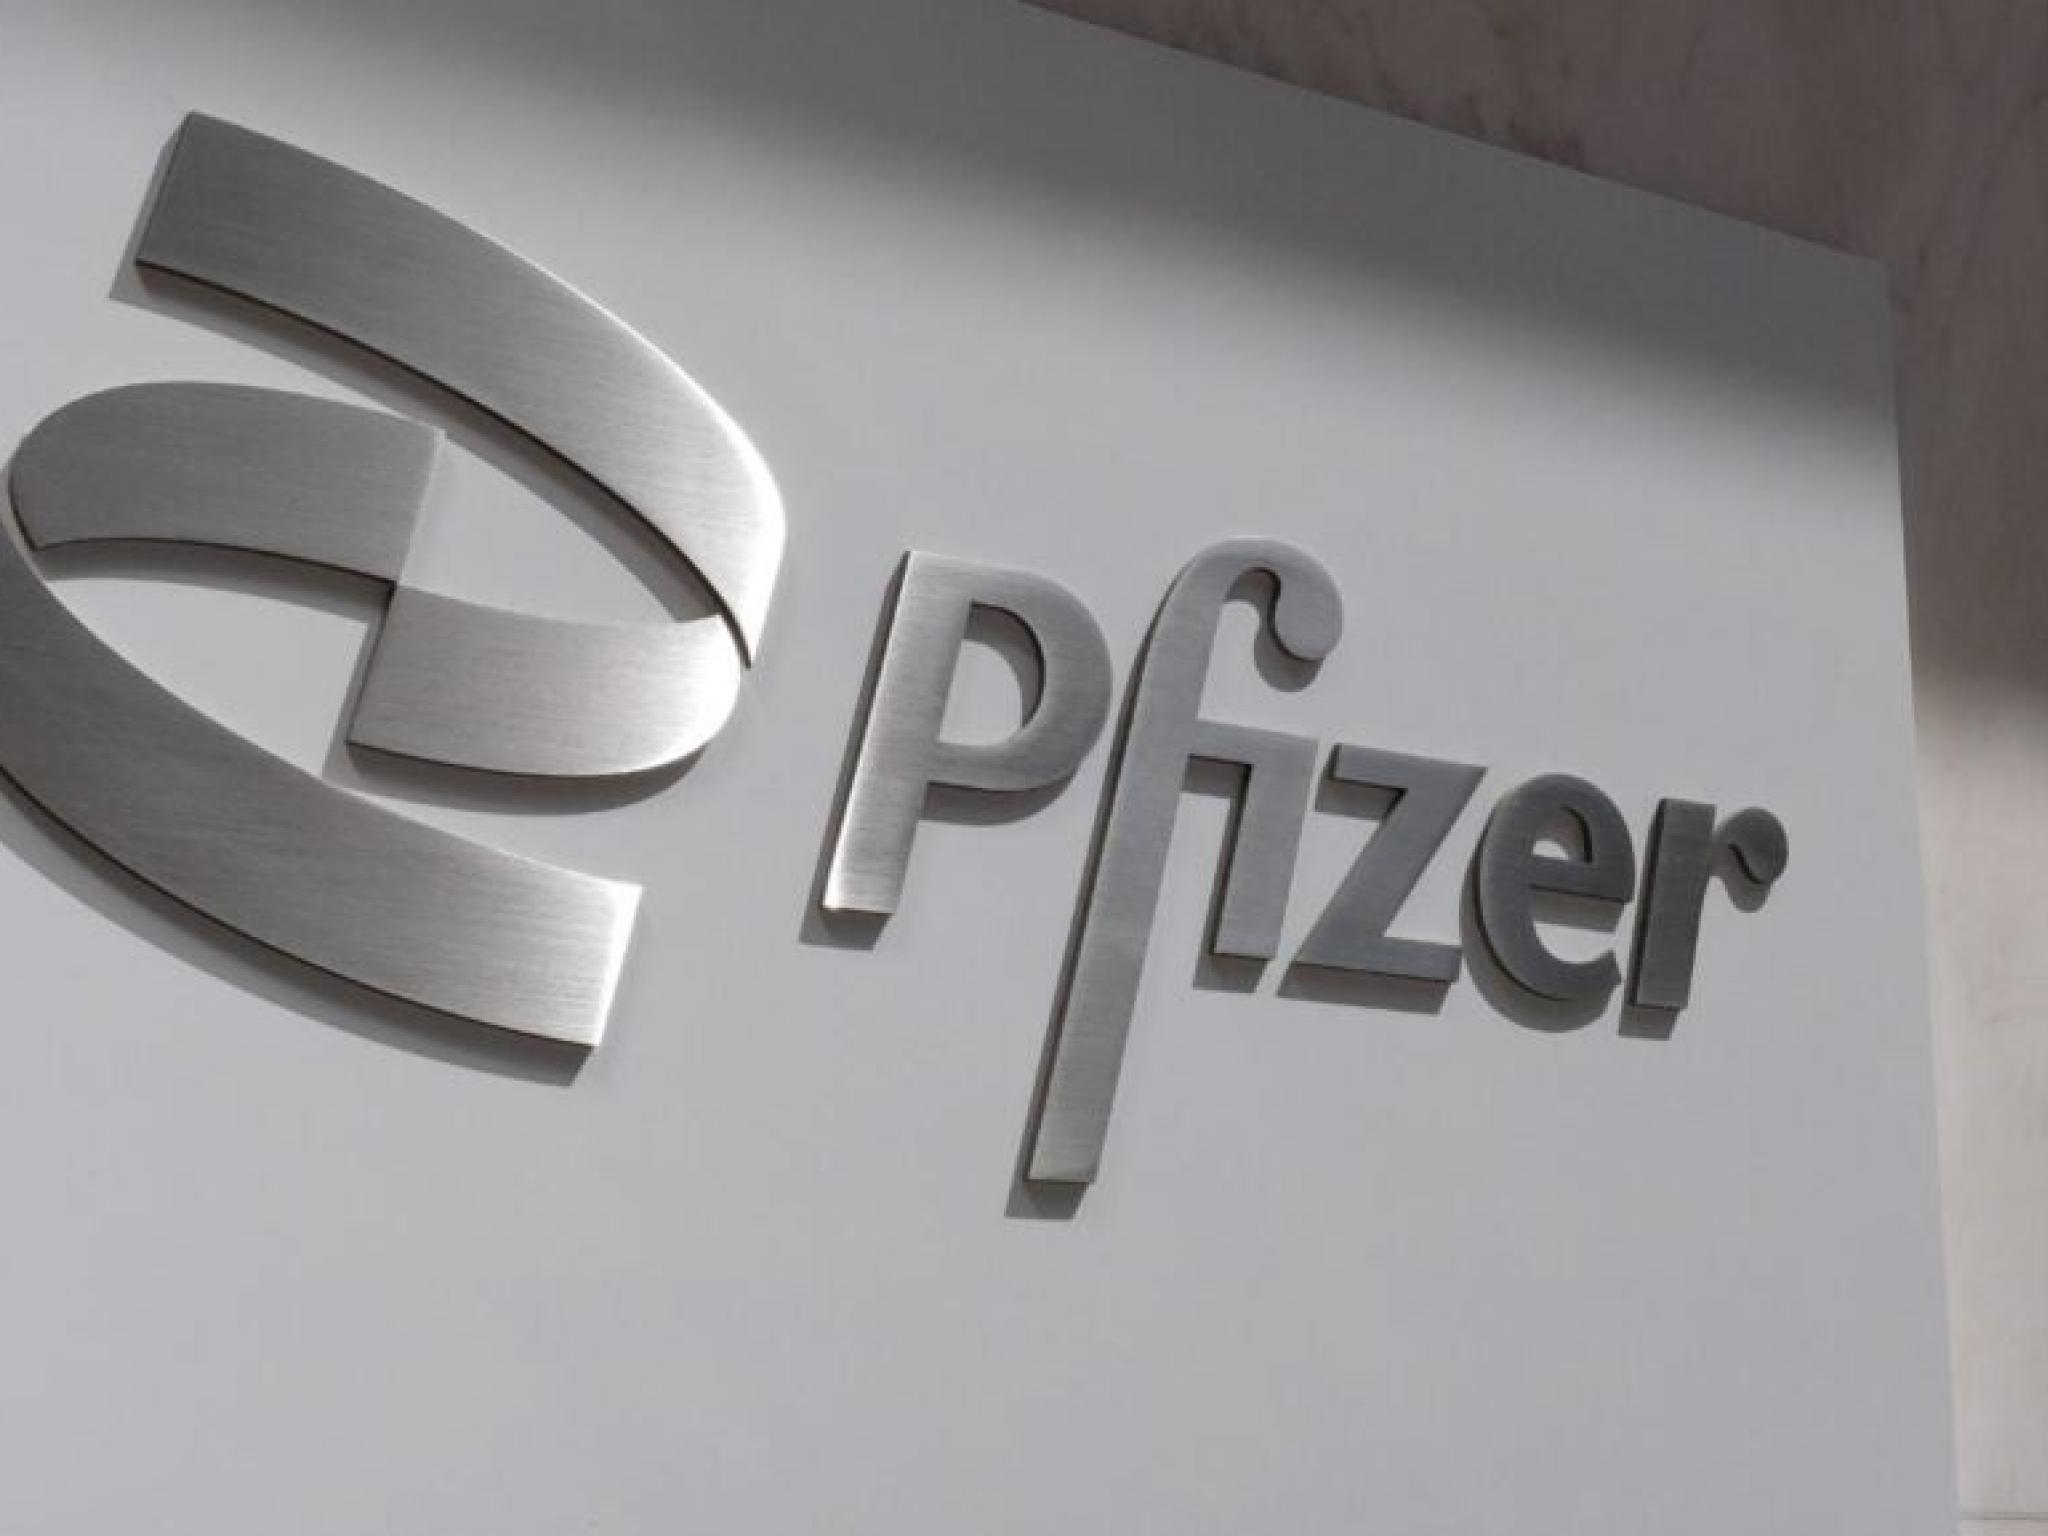  whats-going-on-with-pfizer-stock-today 